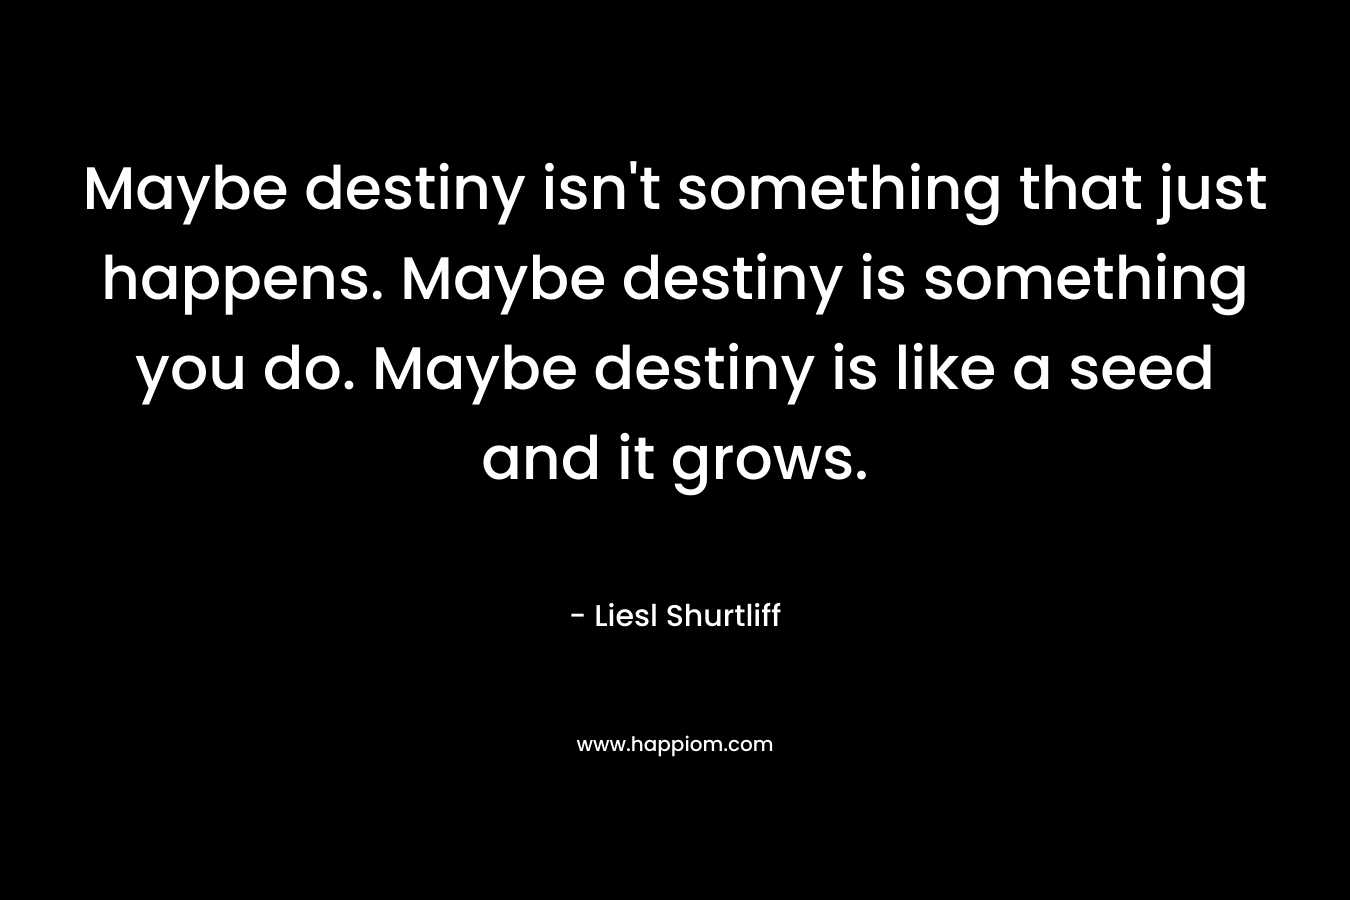 Maybe destiny isn't something that just happens. Maybe destiny is something you do. Maybe destiny is like a seed and it grows.